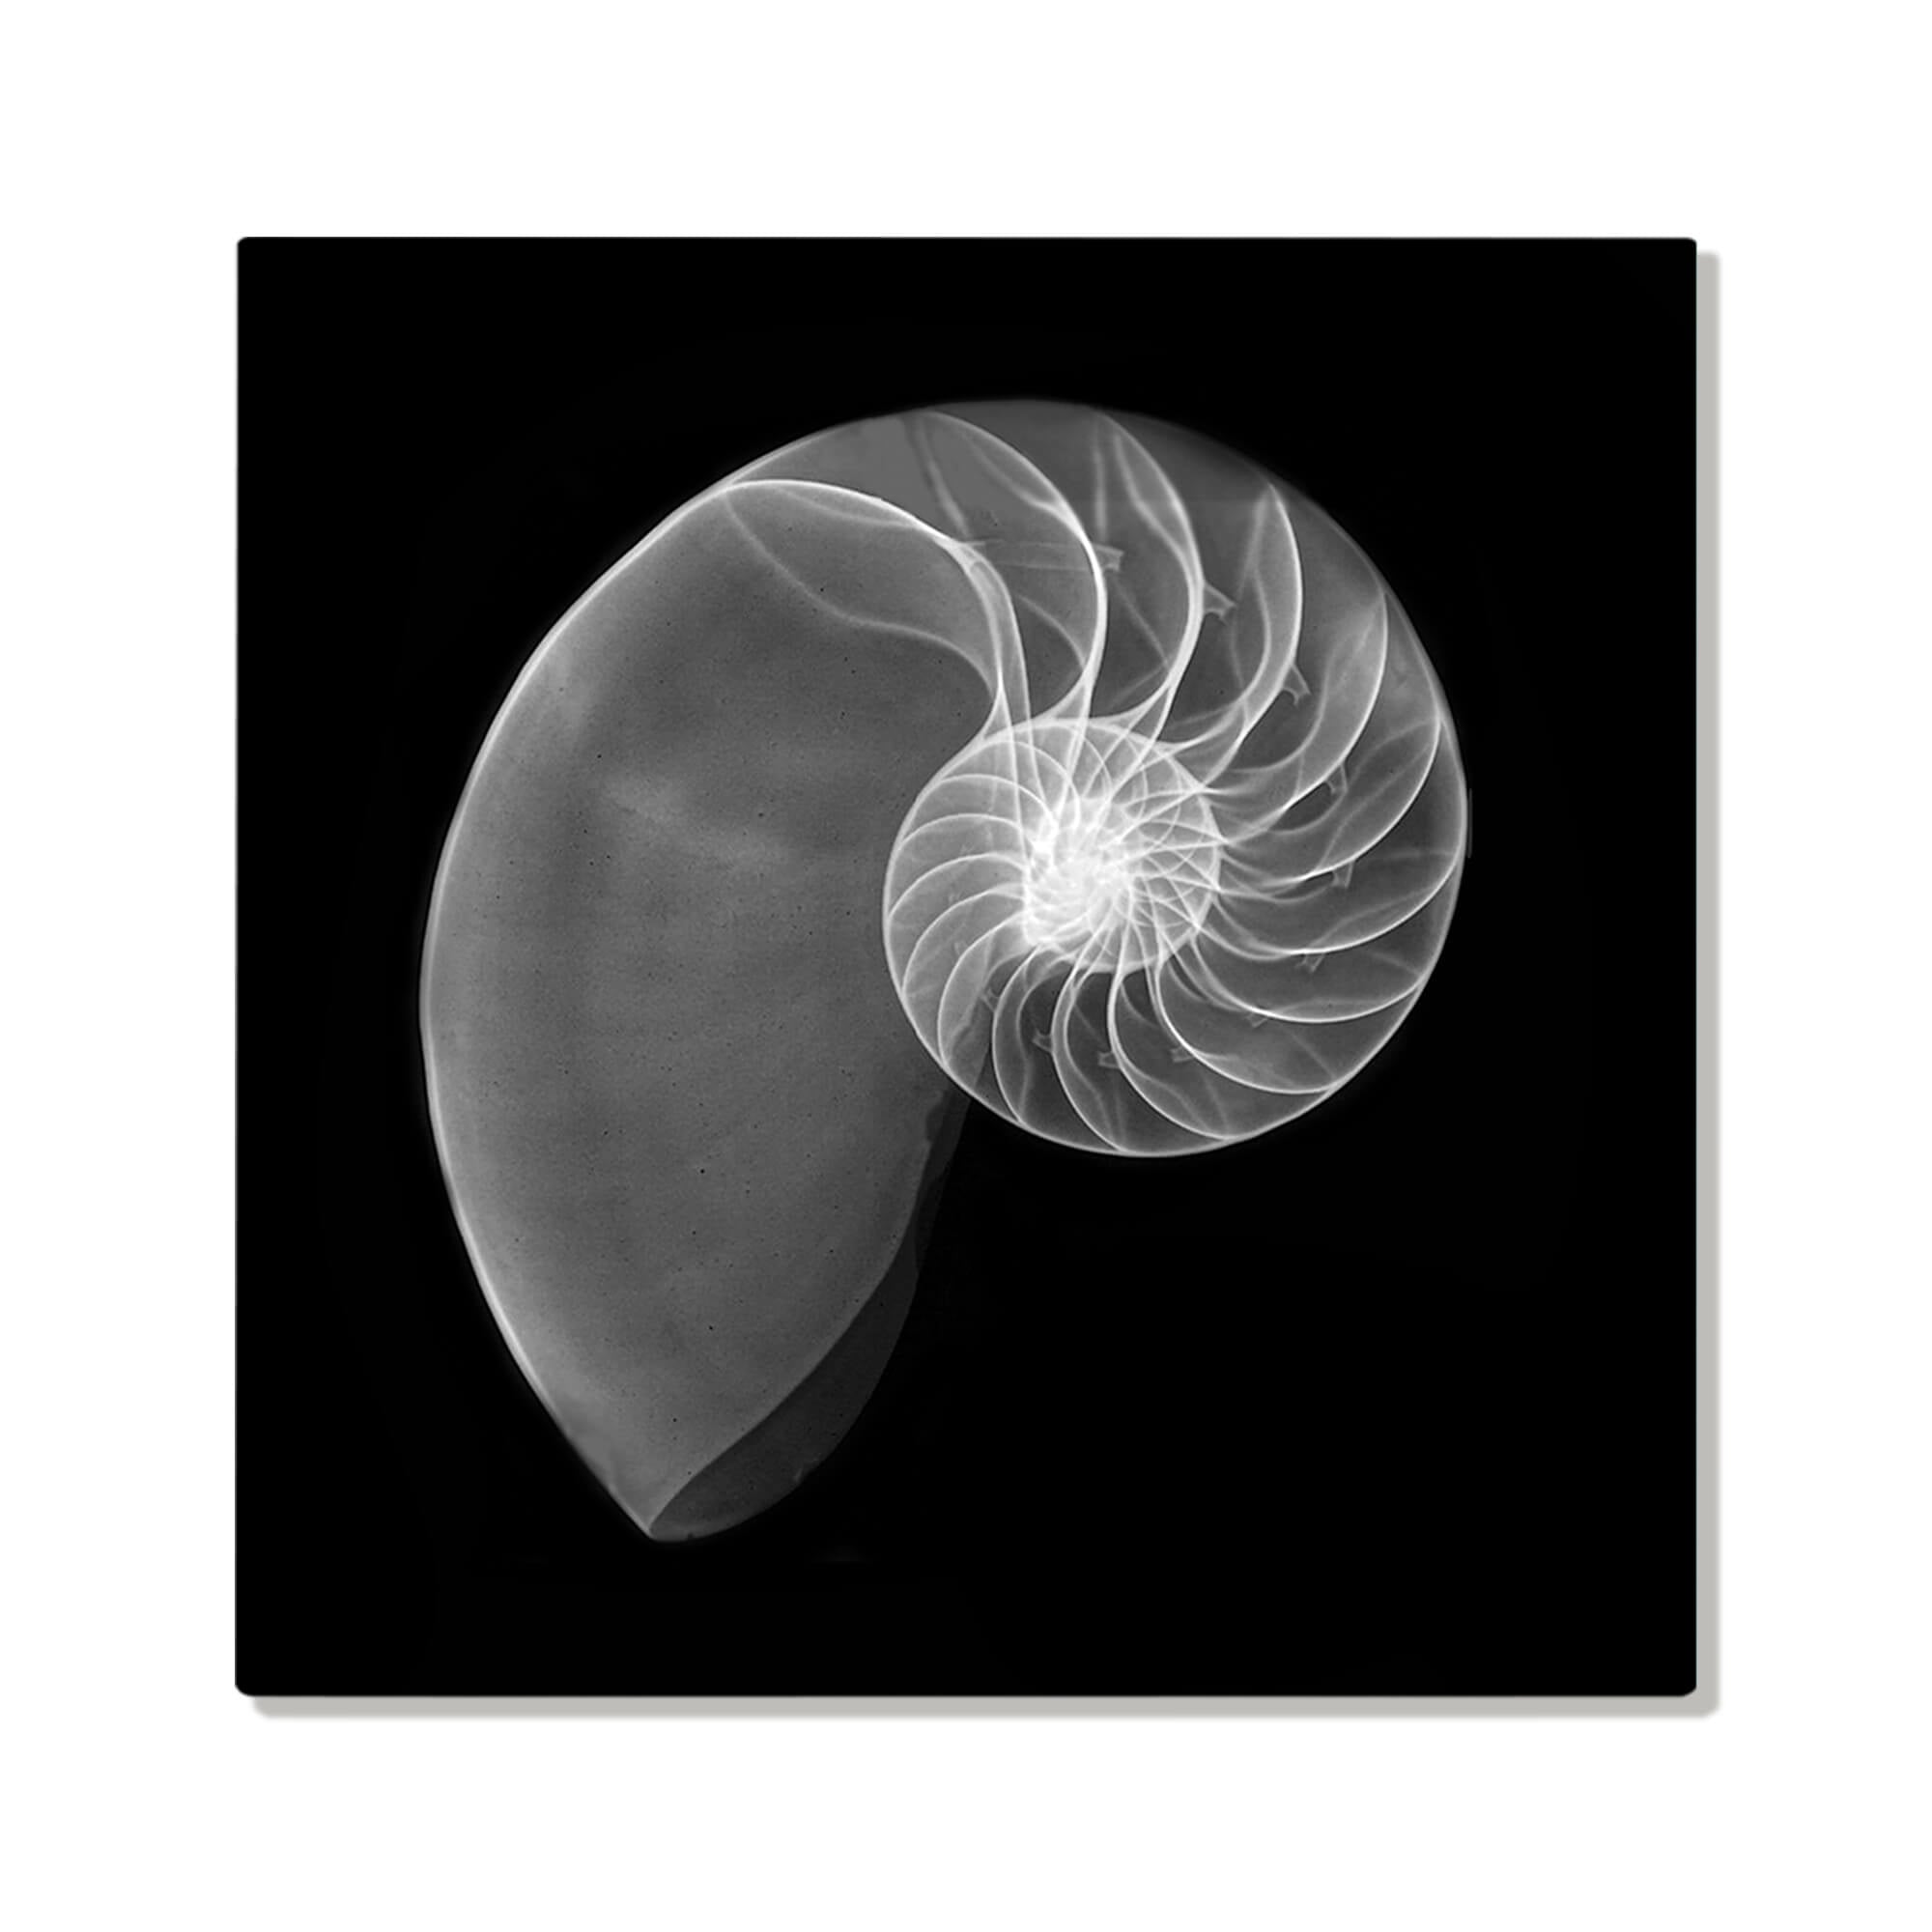 Metal art print of the spiral details of a Nautilus shell by Hawaii artist Michelle Smith